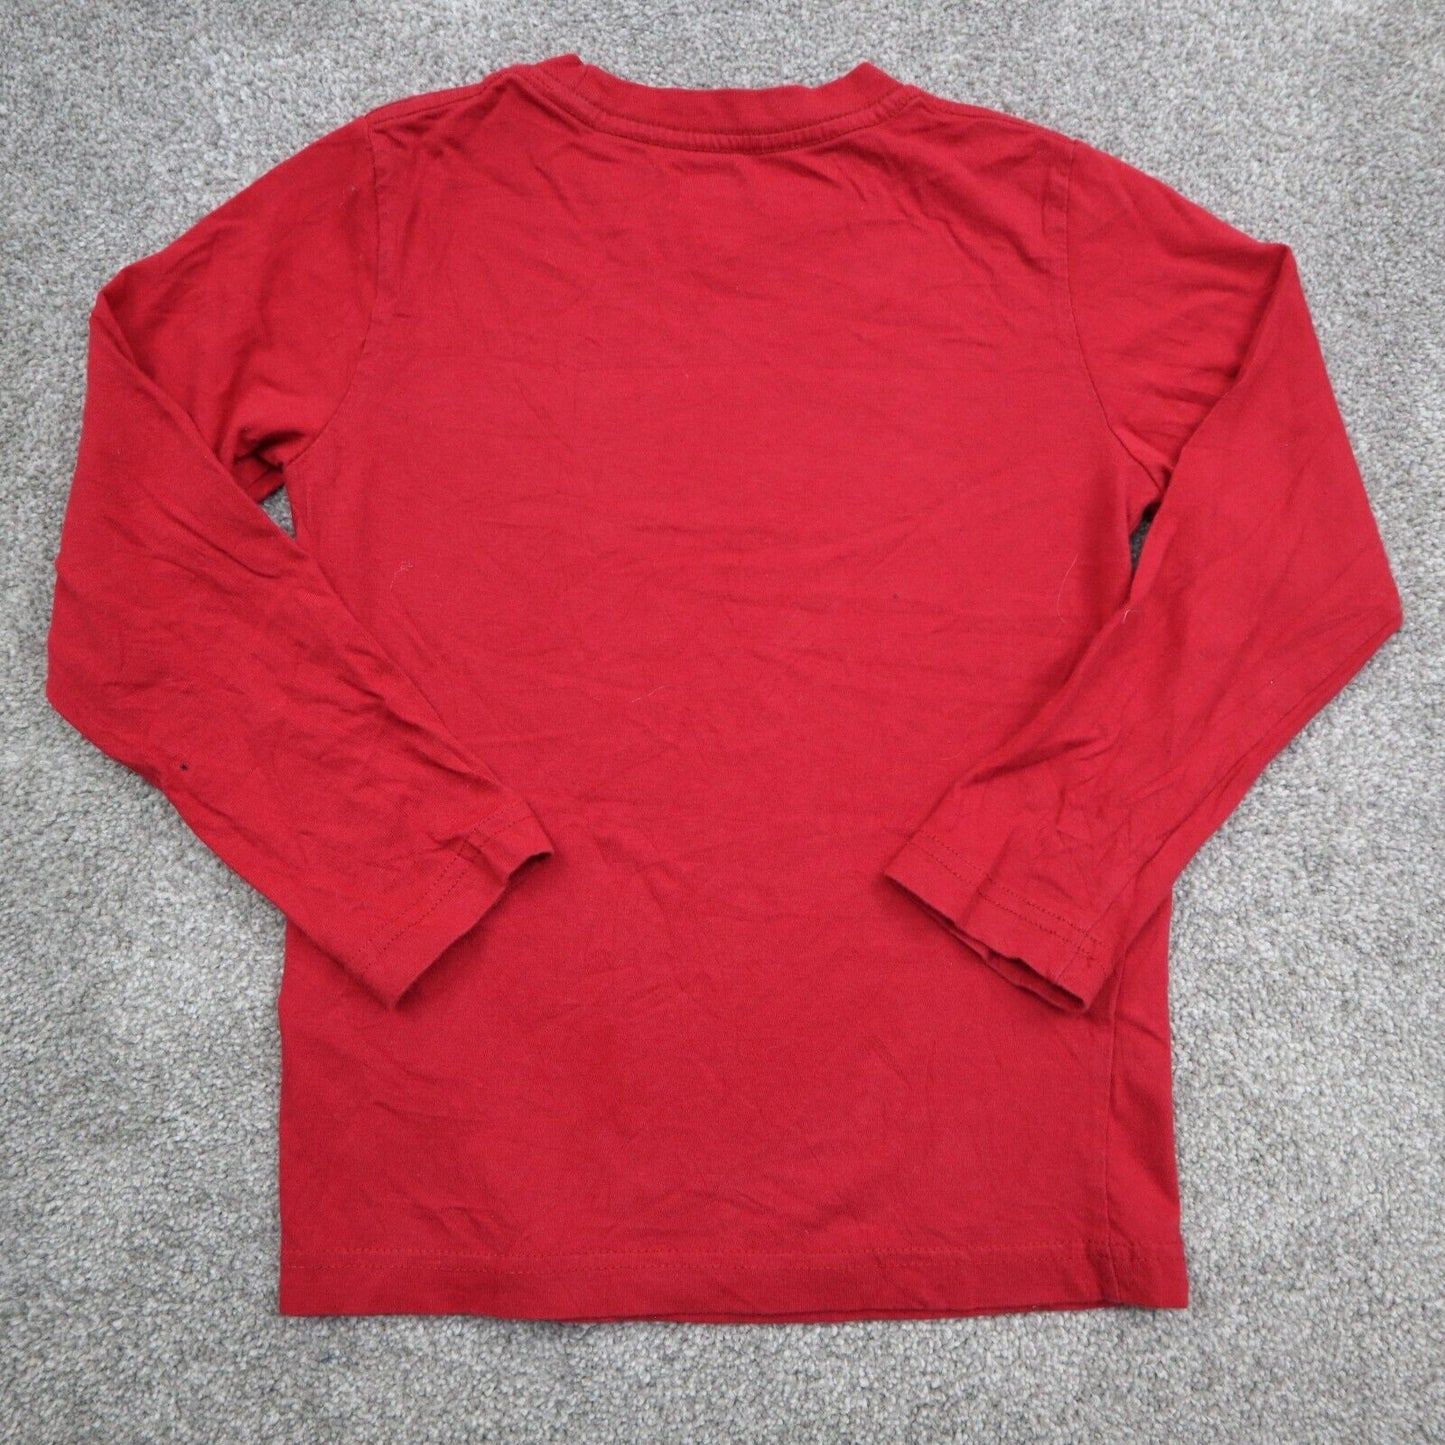 Levi's T Shirt Boys Size 5/6 Red Long Sleeve Graphic Tee Crew Neck 100% Cotton